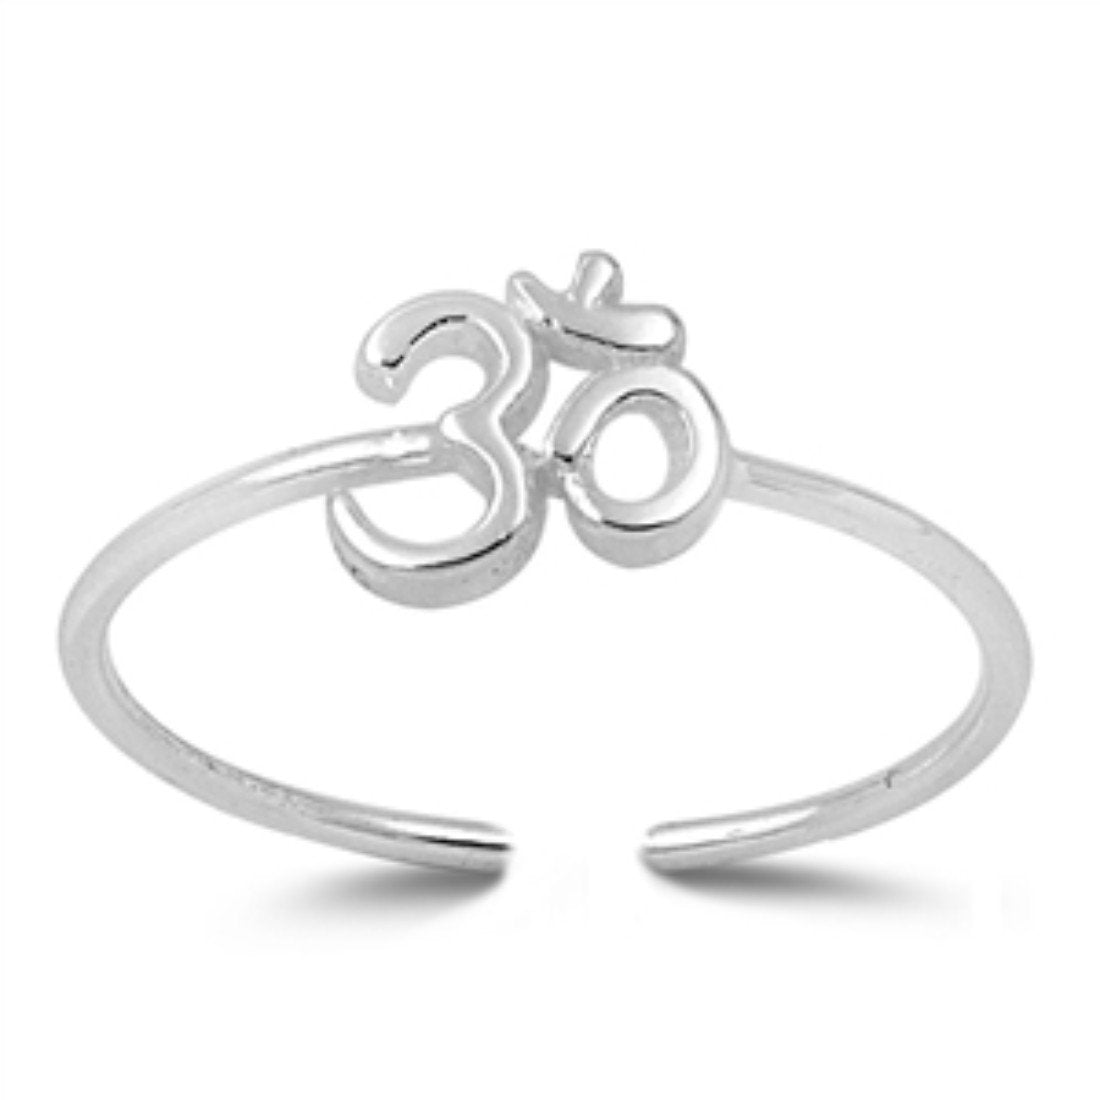 Om Sign Toe Ring Adjustable Band Fashion Jewelry 925 Sterling Silver (8mm)